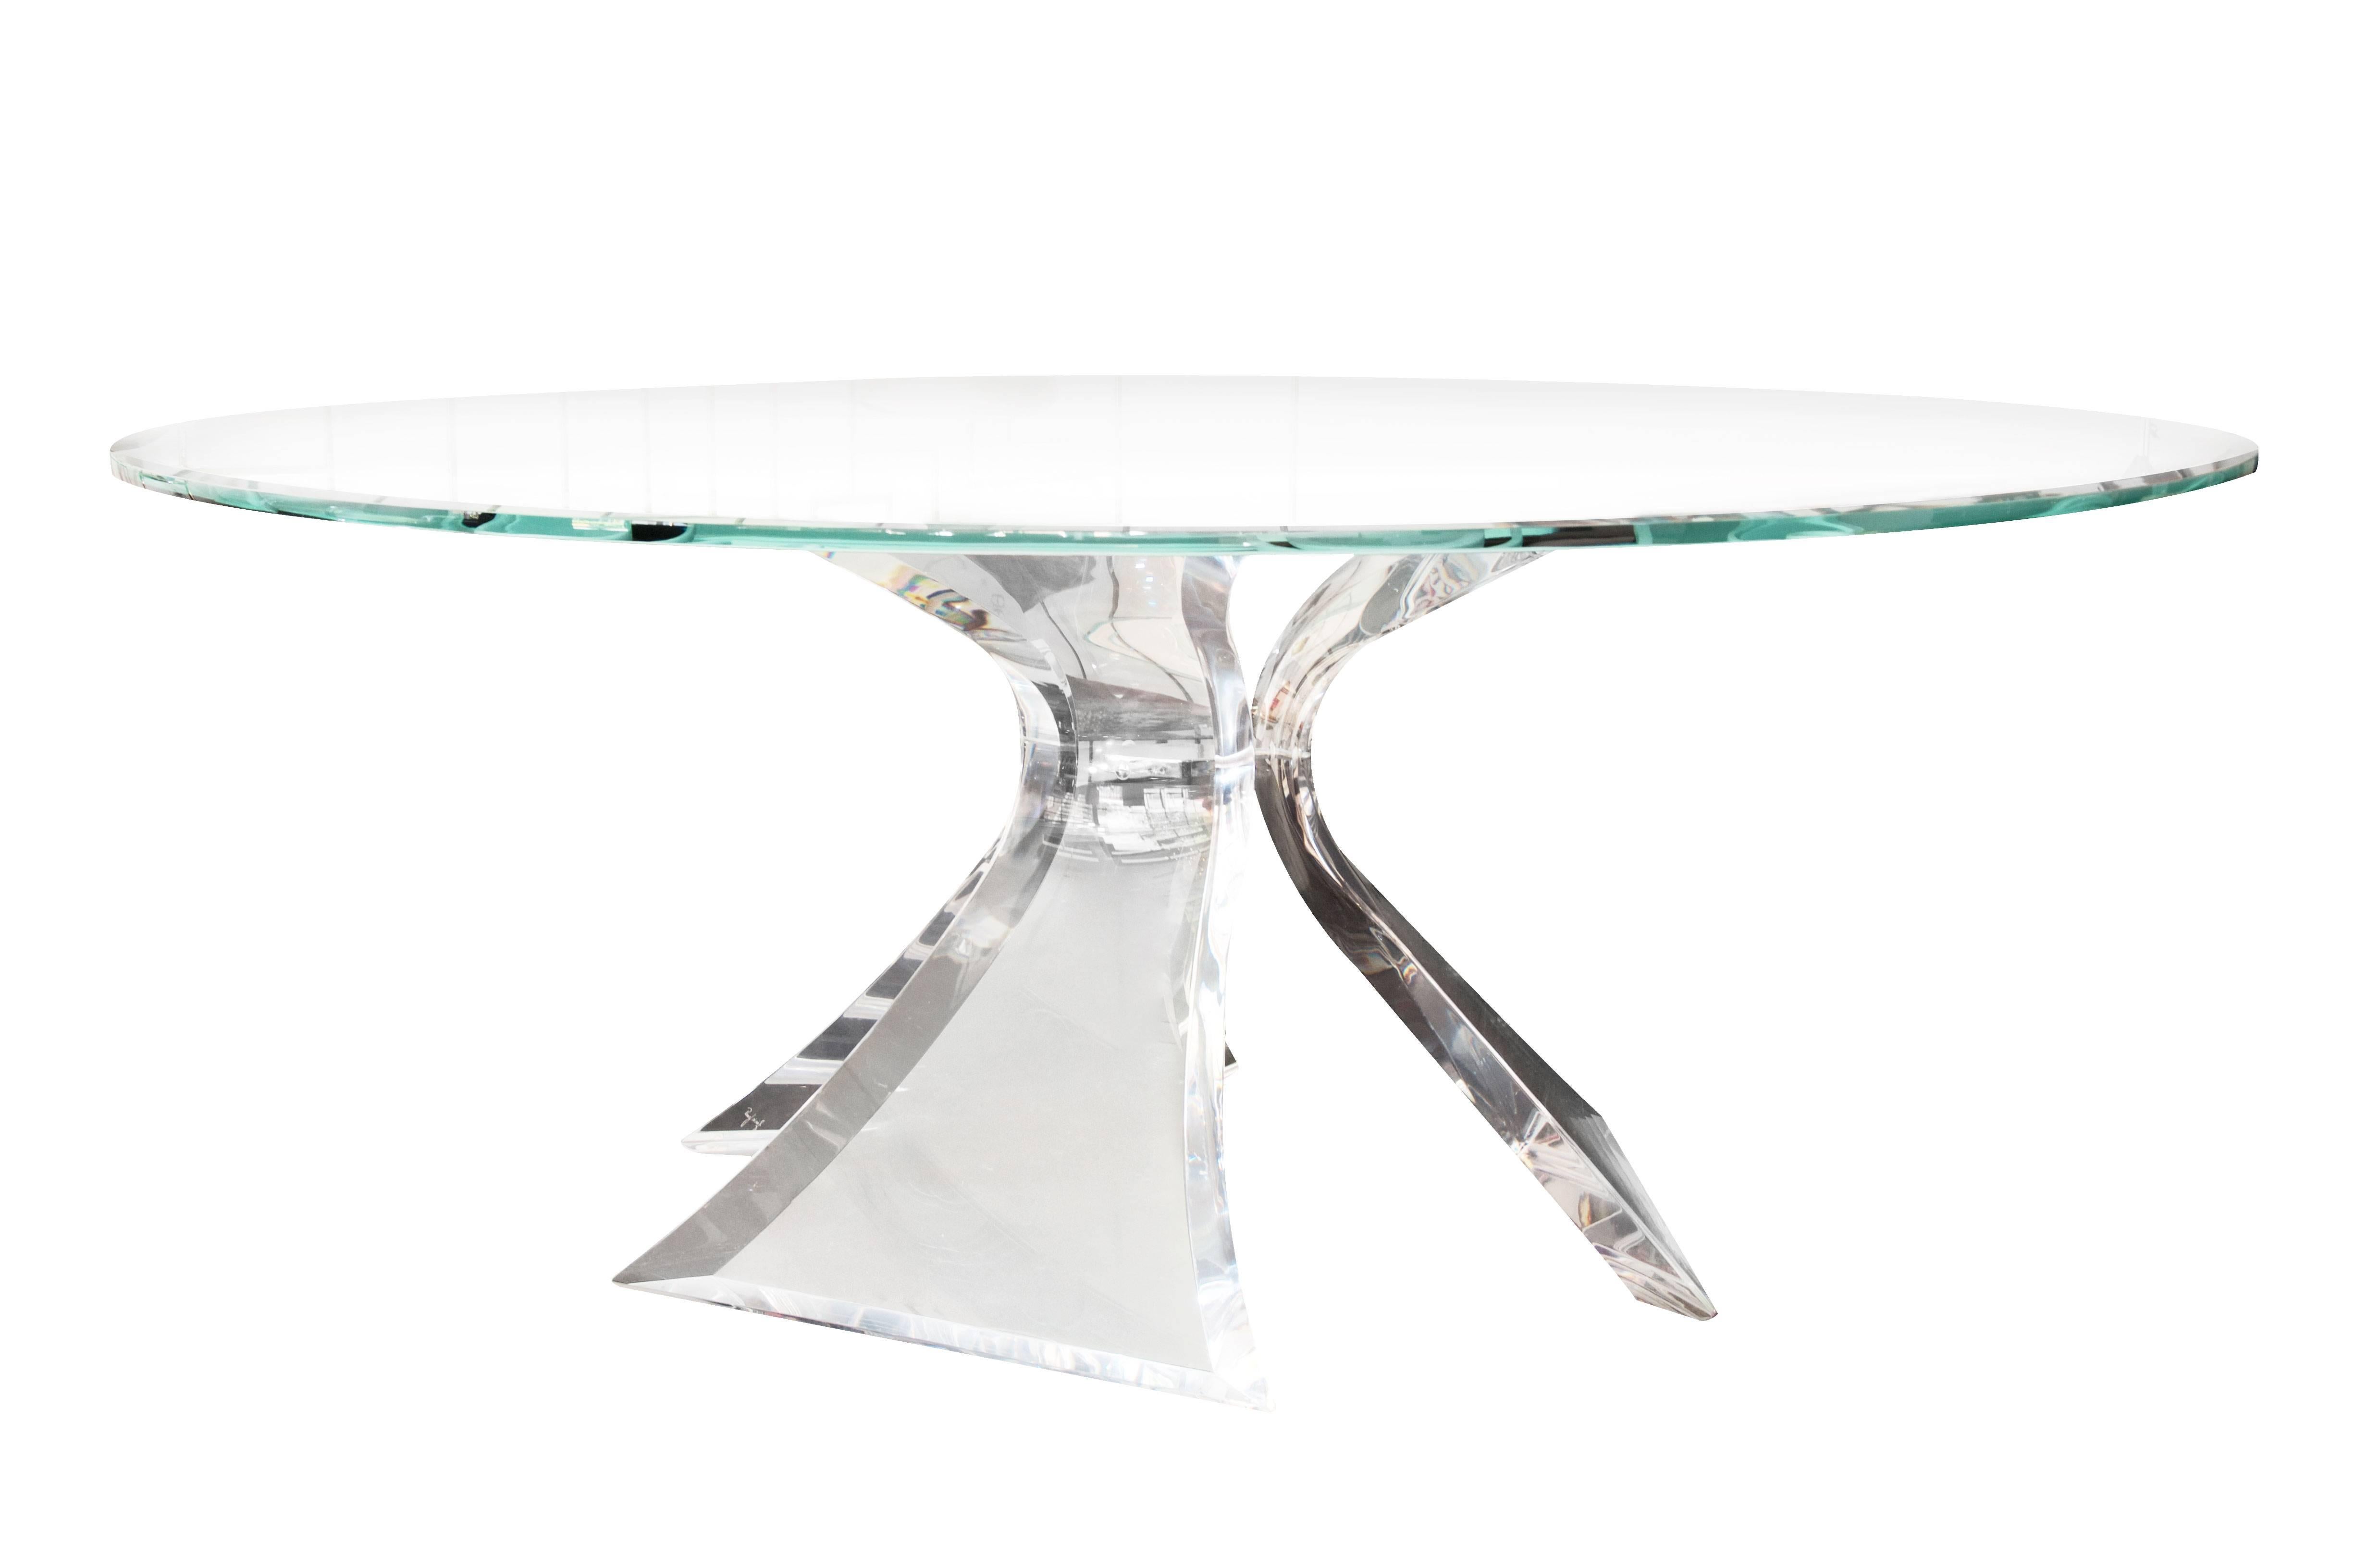 Magnificent Lucite table by Lion in Frost, custom-made. Signed Lion in Frost, circa 1983. Table base is comprised of three curved panels of Lucite, each panel 4” in thickness. Glass tabletop was custom-made for the base and has been etched with a